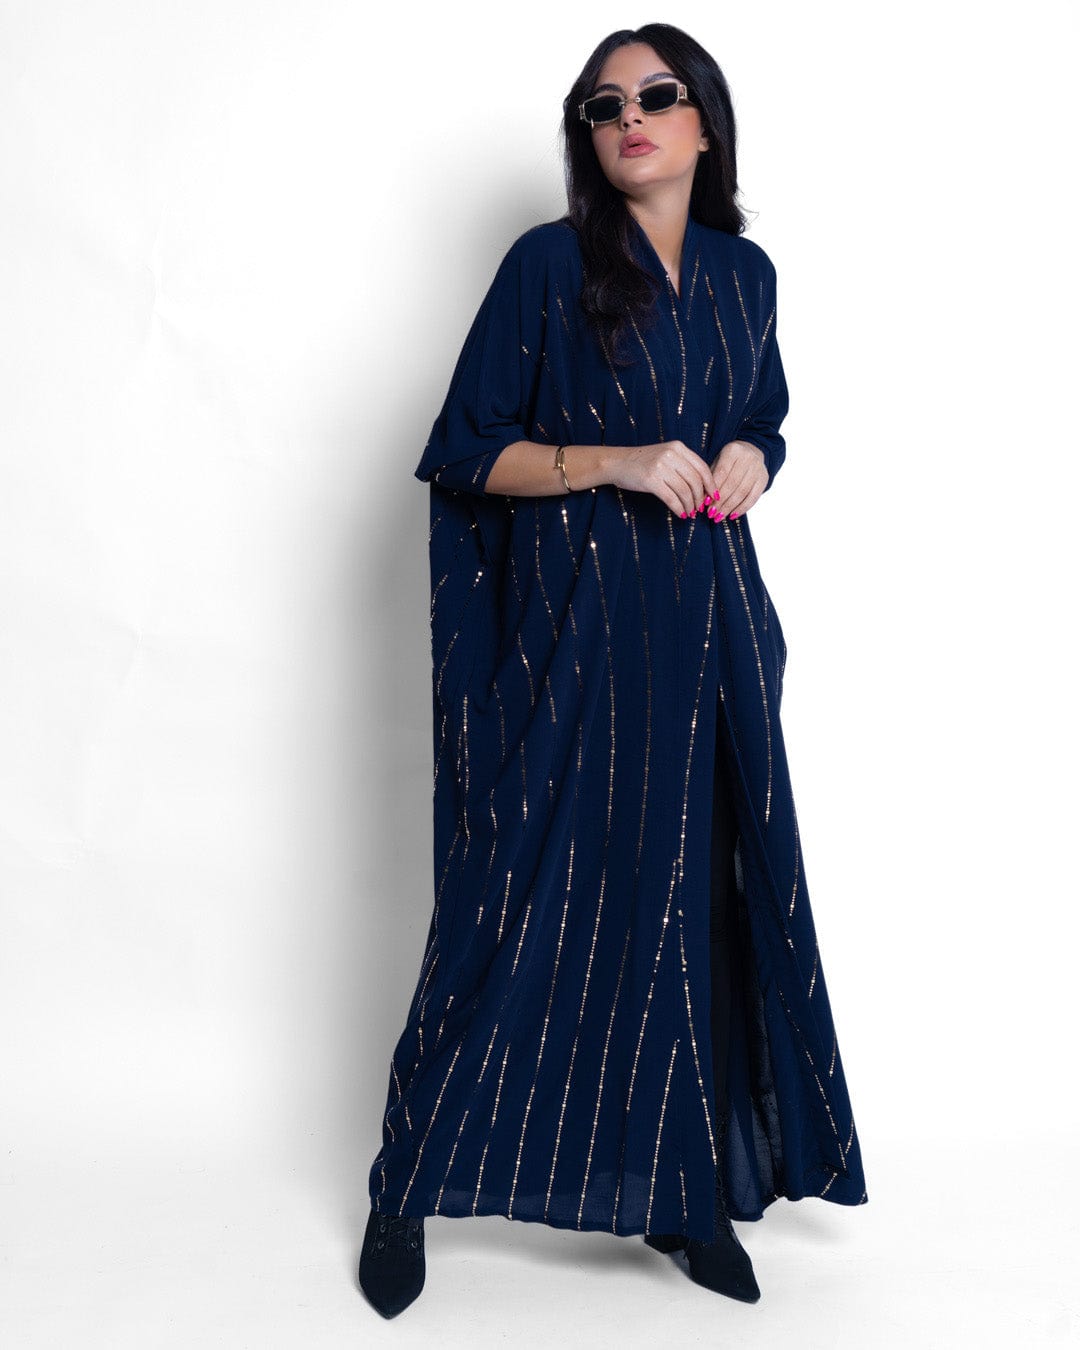 CL-0178 Emirati model, navy blue fabric with horizontal sequins